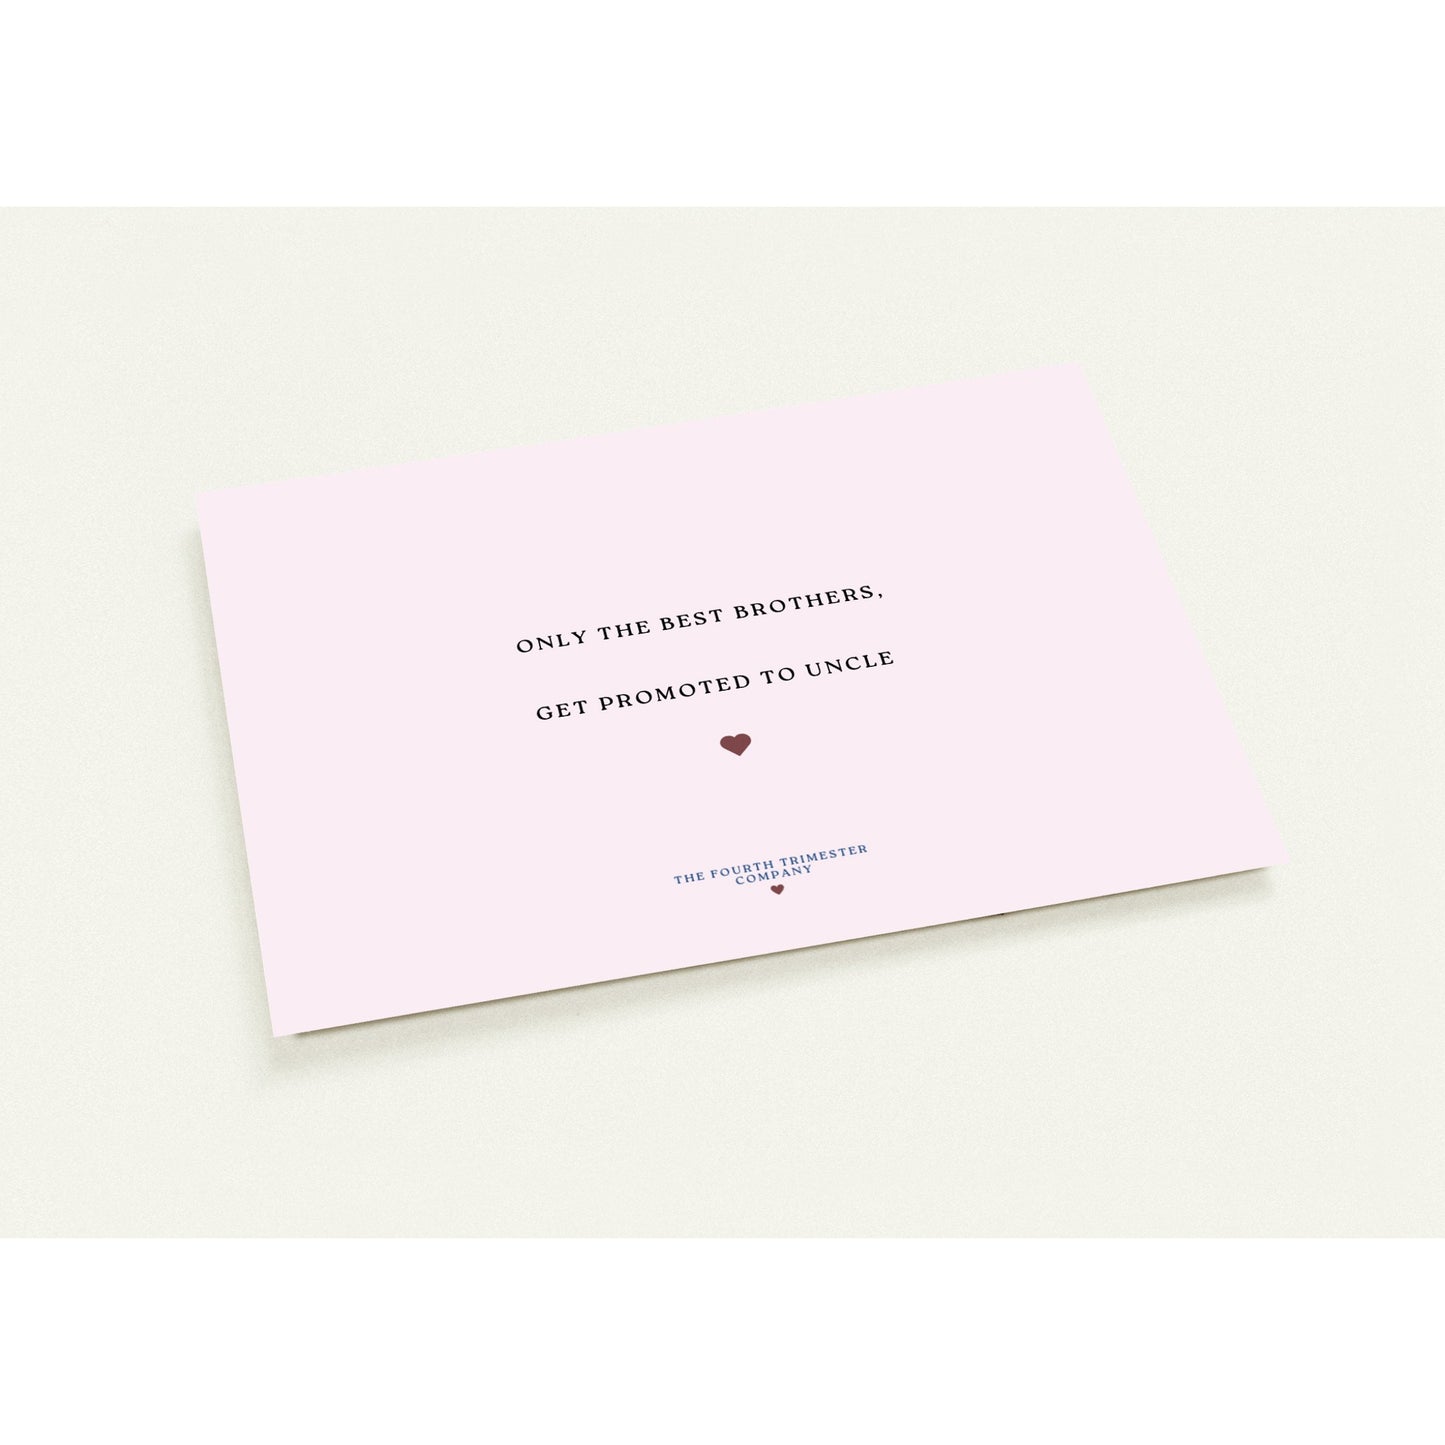 'Only the best Brothers' 10 Announcement Cards- Blush Pink.